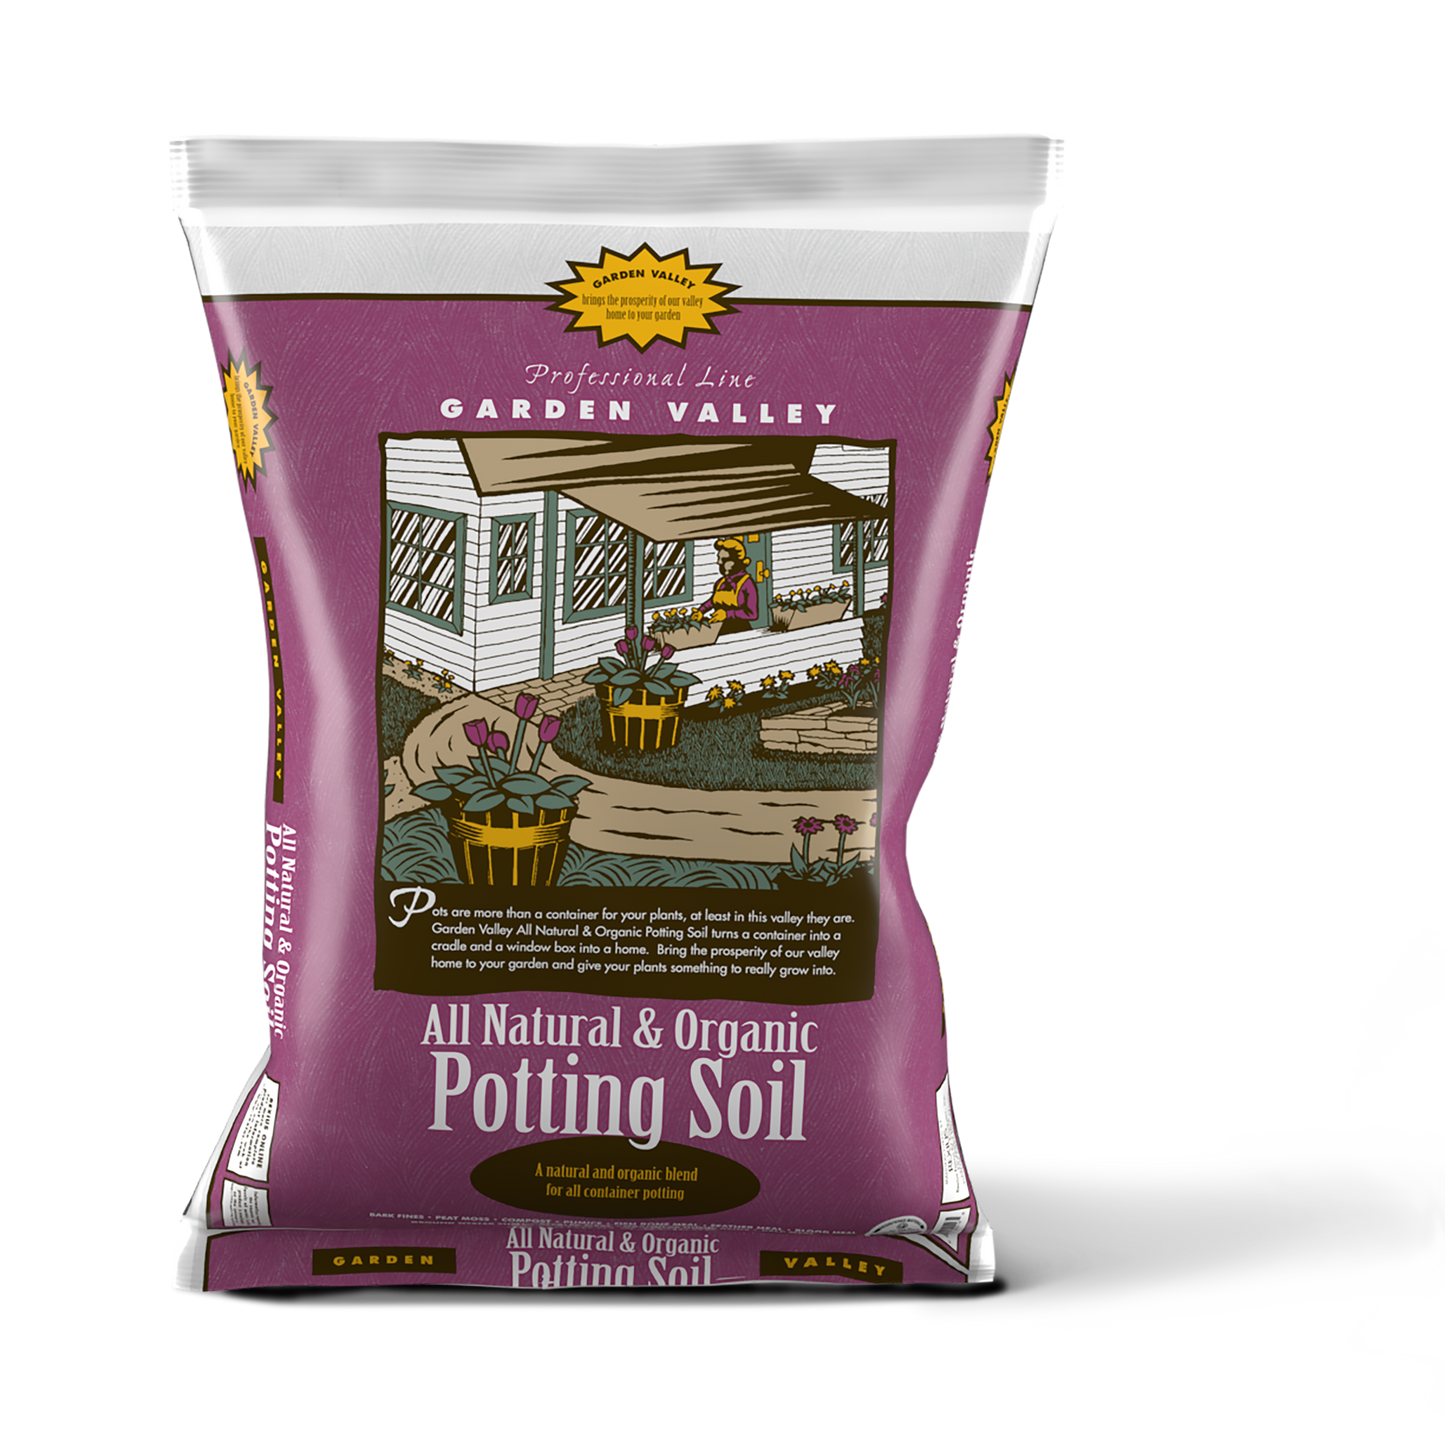 All Natural & Organic Potting Soil (Certified for Organic Use)